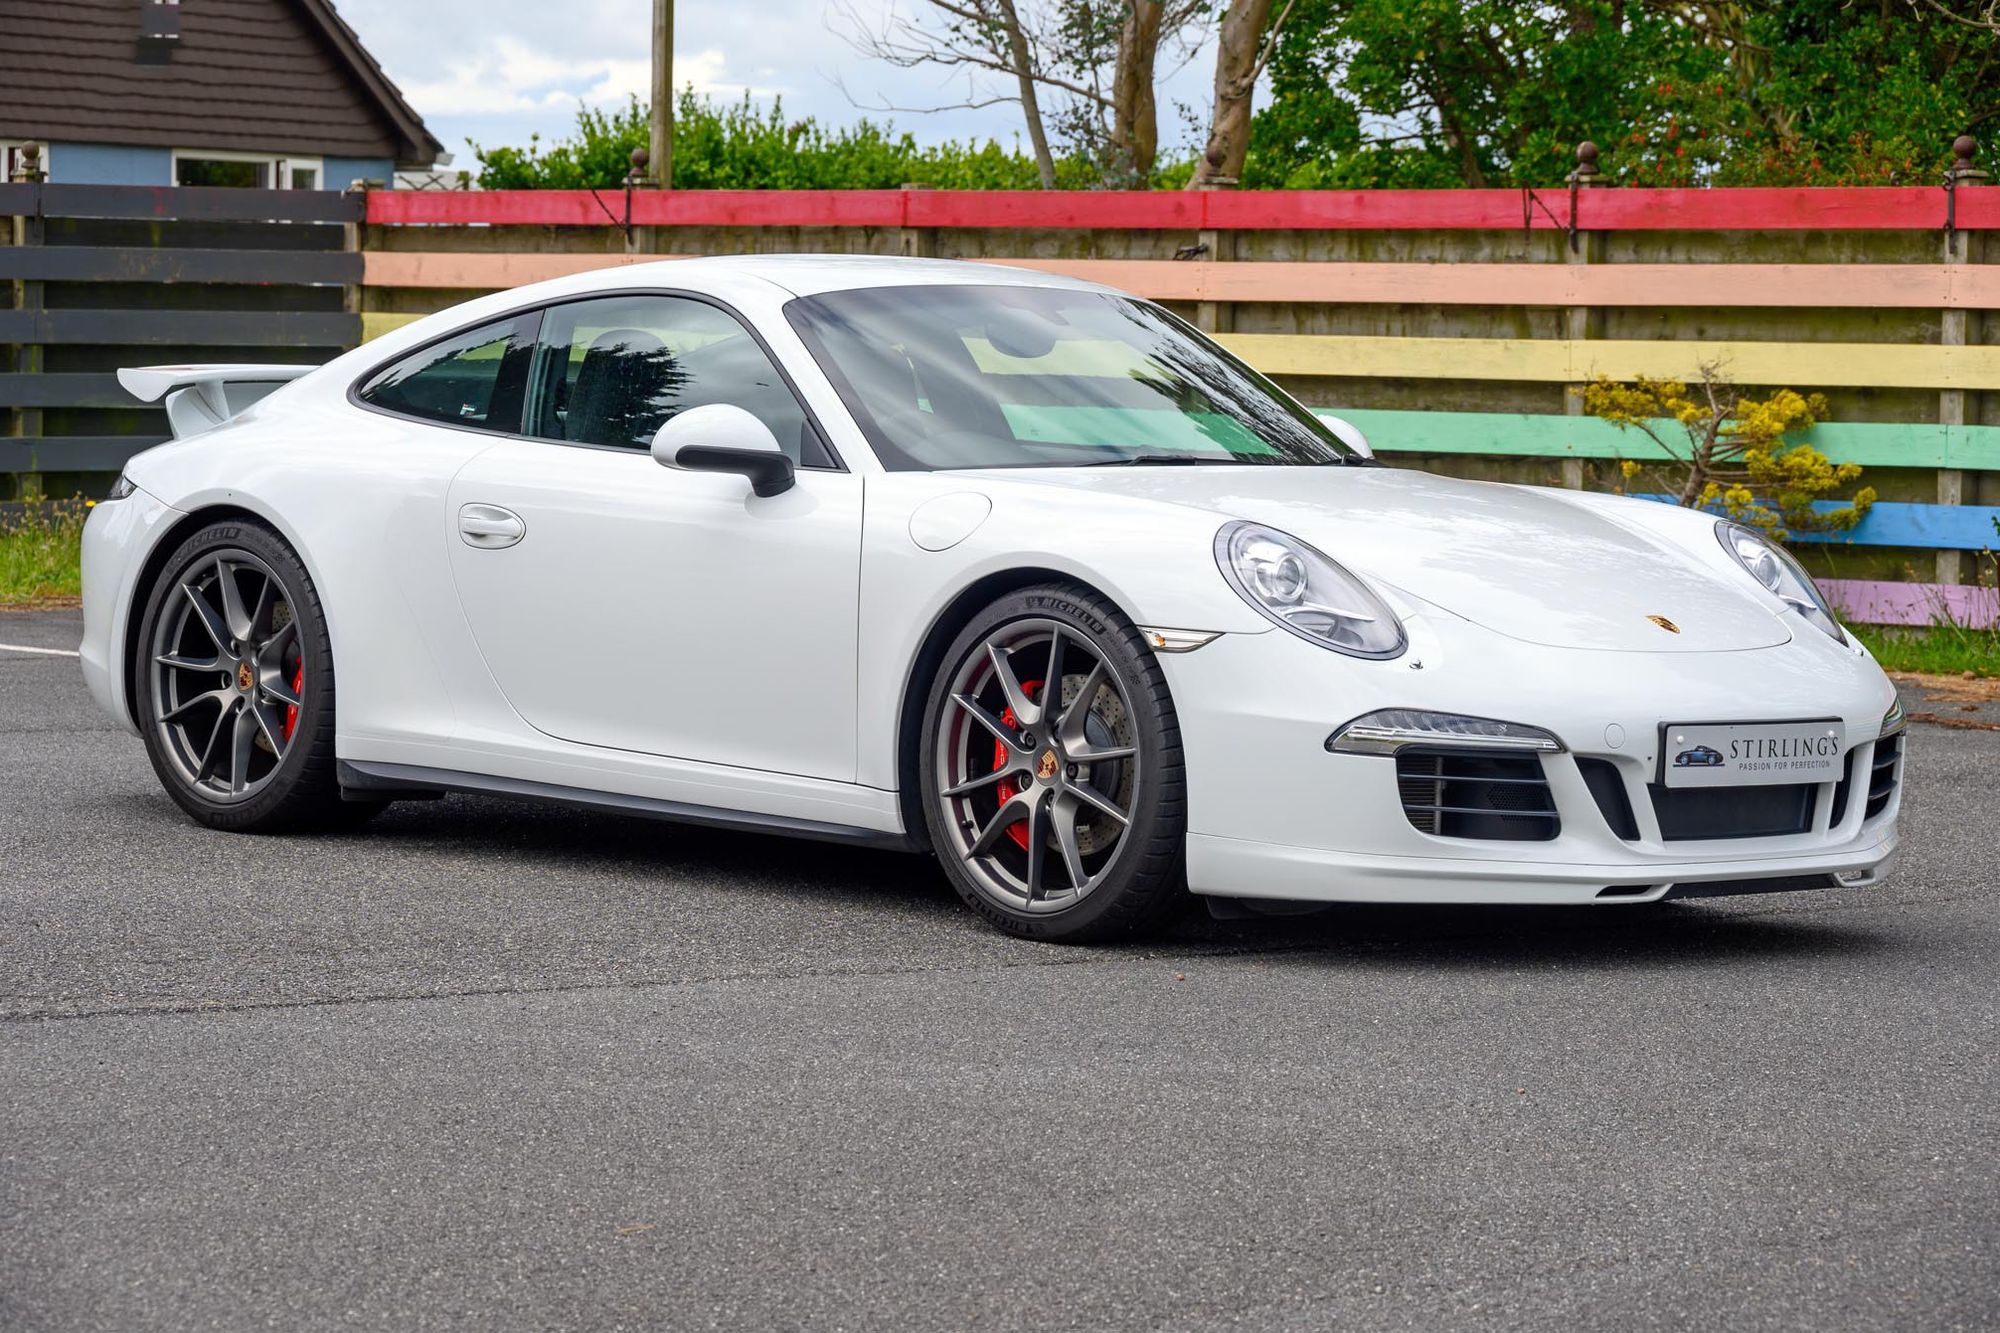 2014 Porsche 911 () Carrera 4S ,PDK, Aerokit Cup, Only 16,600 Miles,  for sale - Stirlings